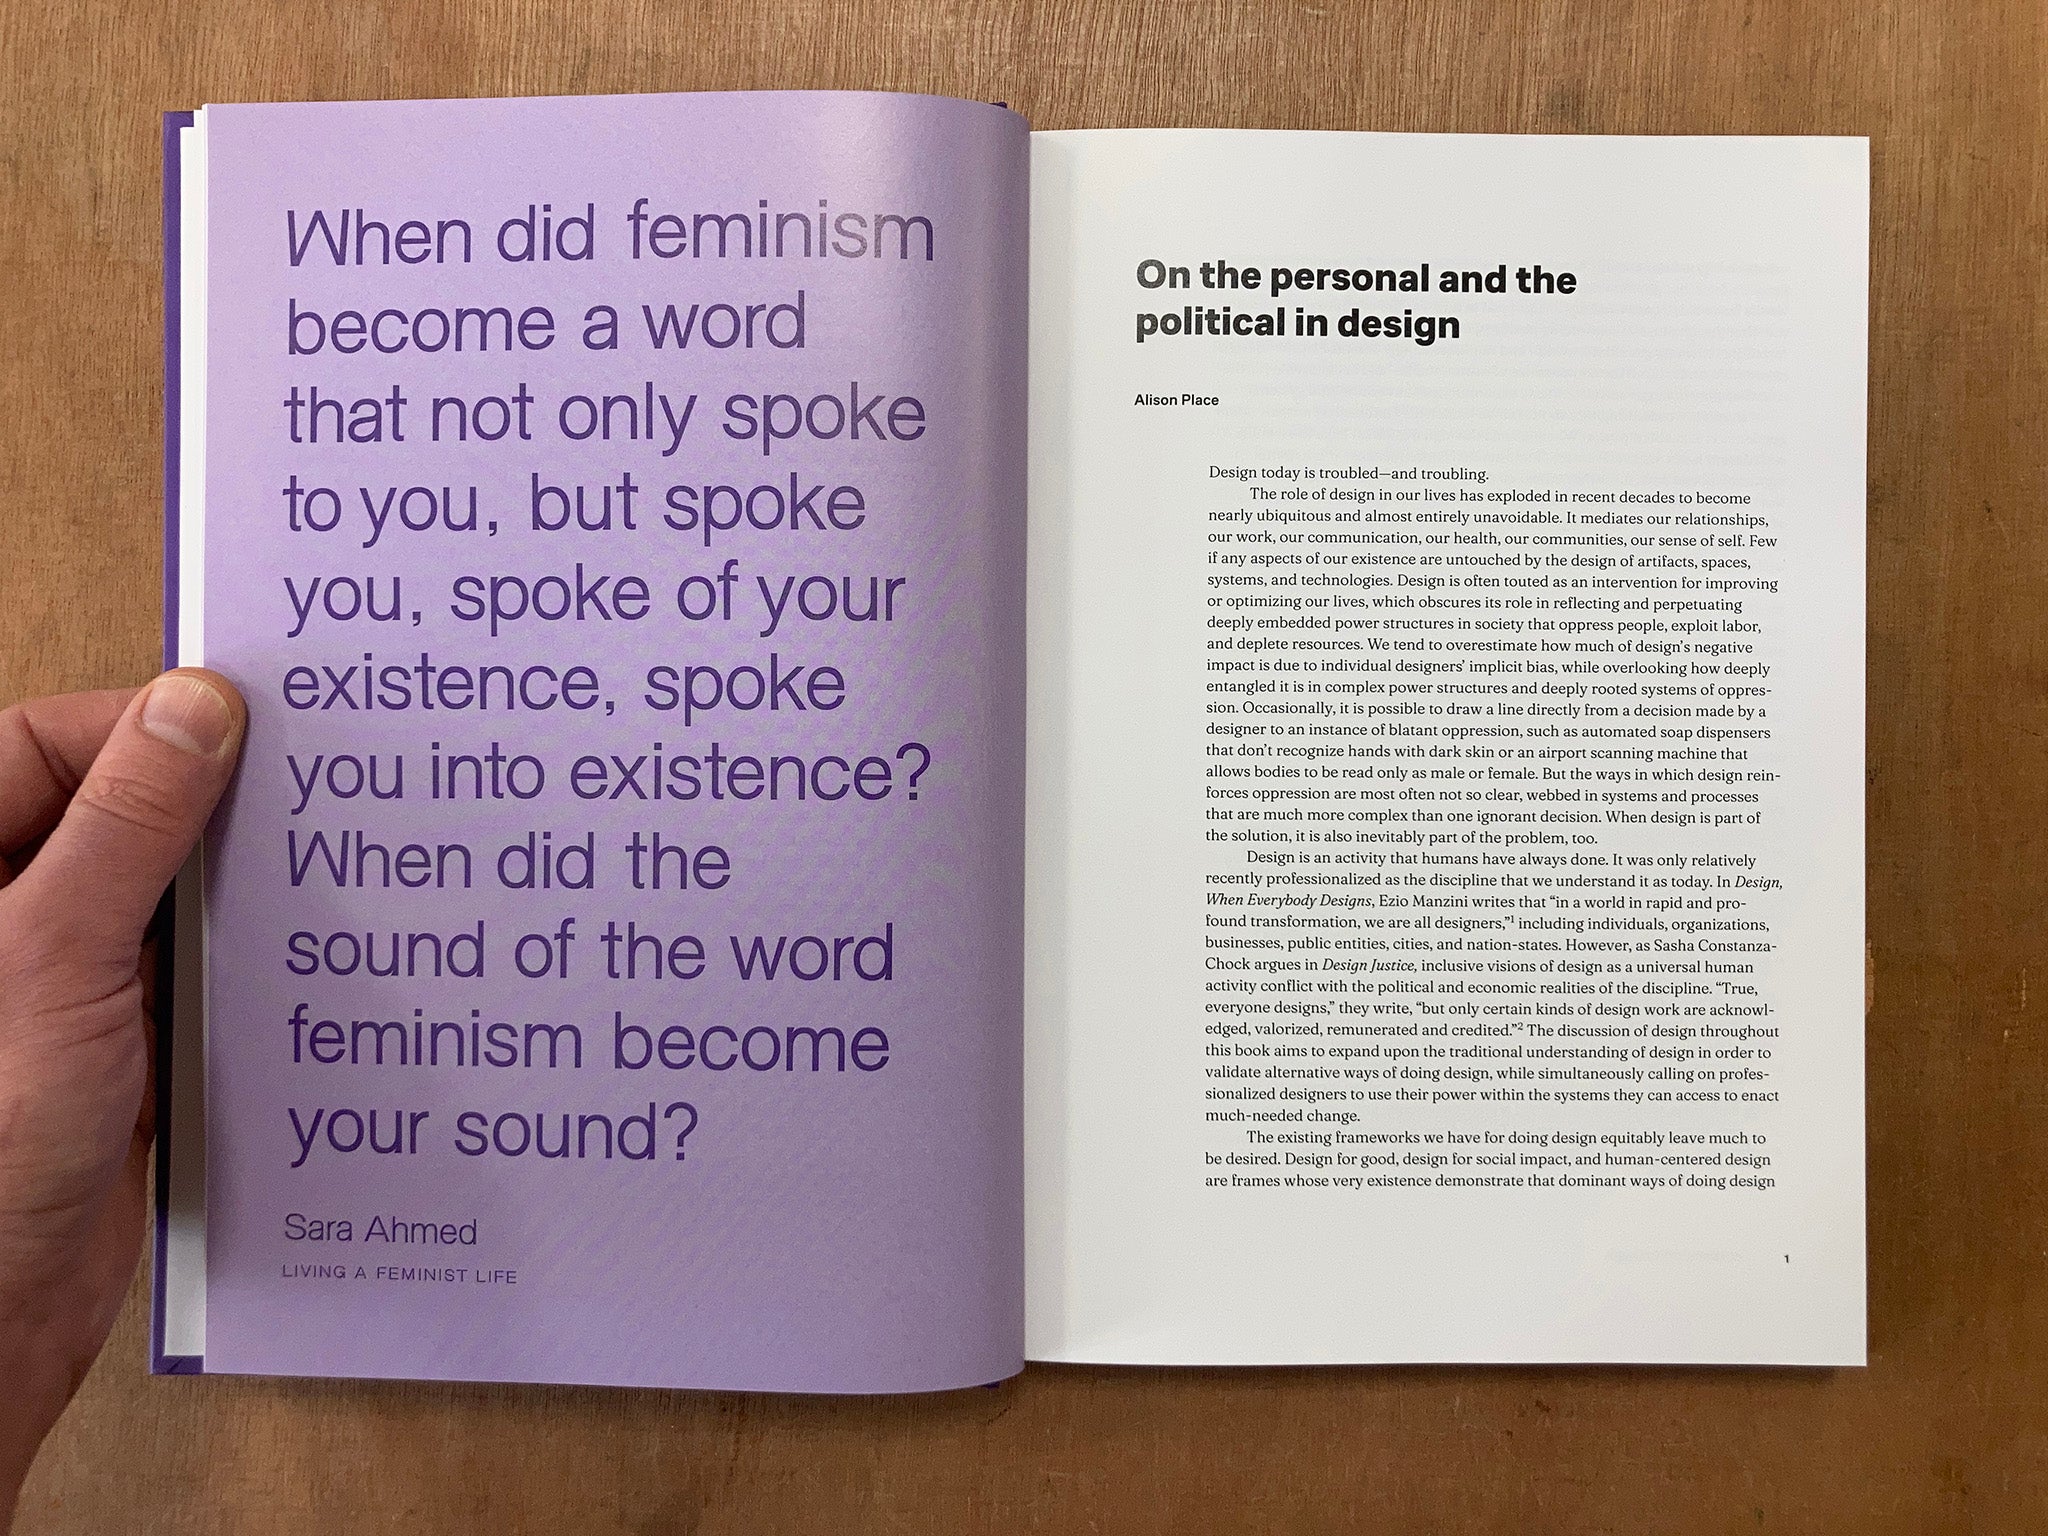 FEMINIST DESIGNER: ON THE PERSONAL AND THE POLITICAL IN DESIGN edited by Alison Place